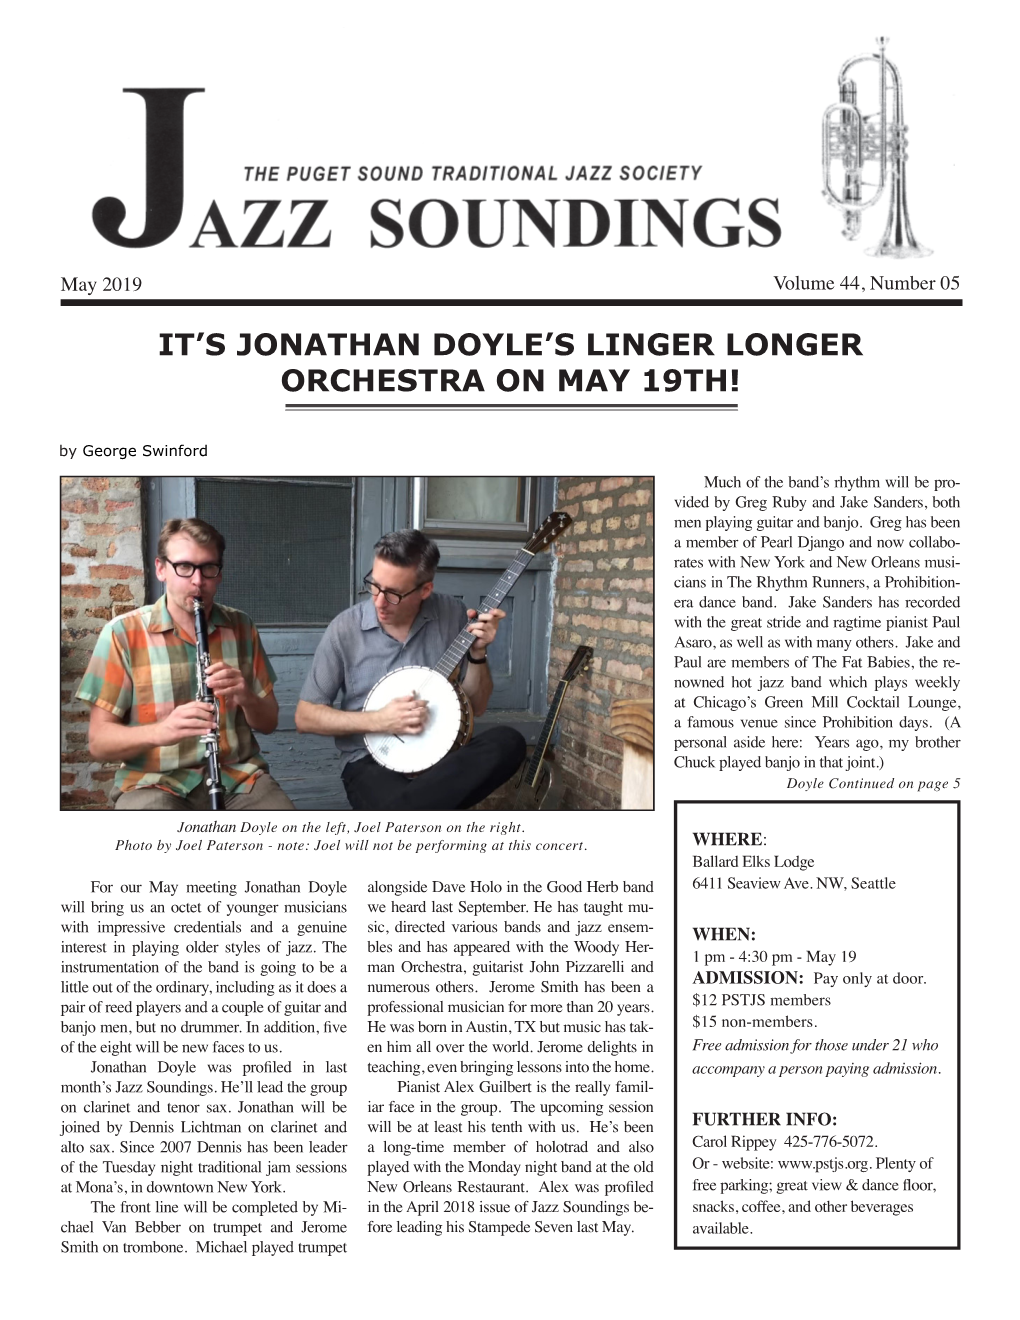 It's Jonathan Doyle's Linger Longer Orchestra on May